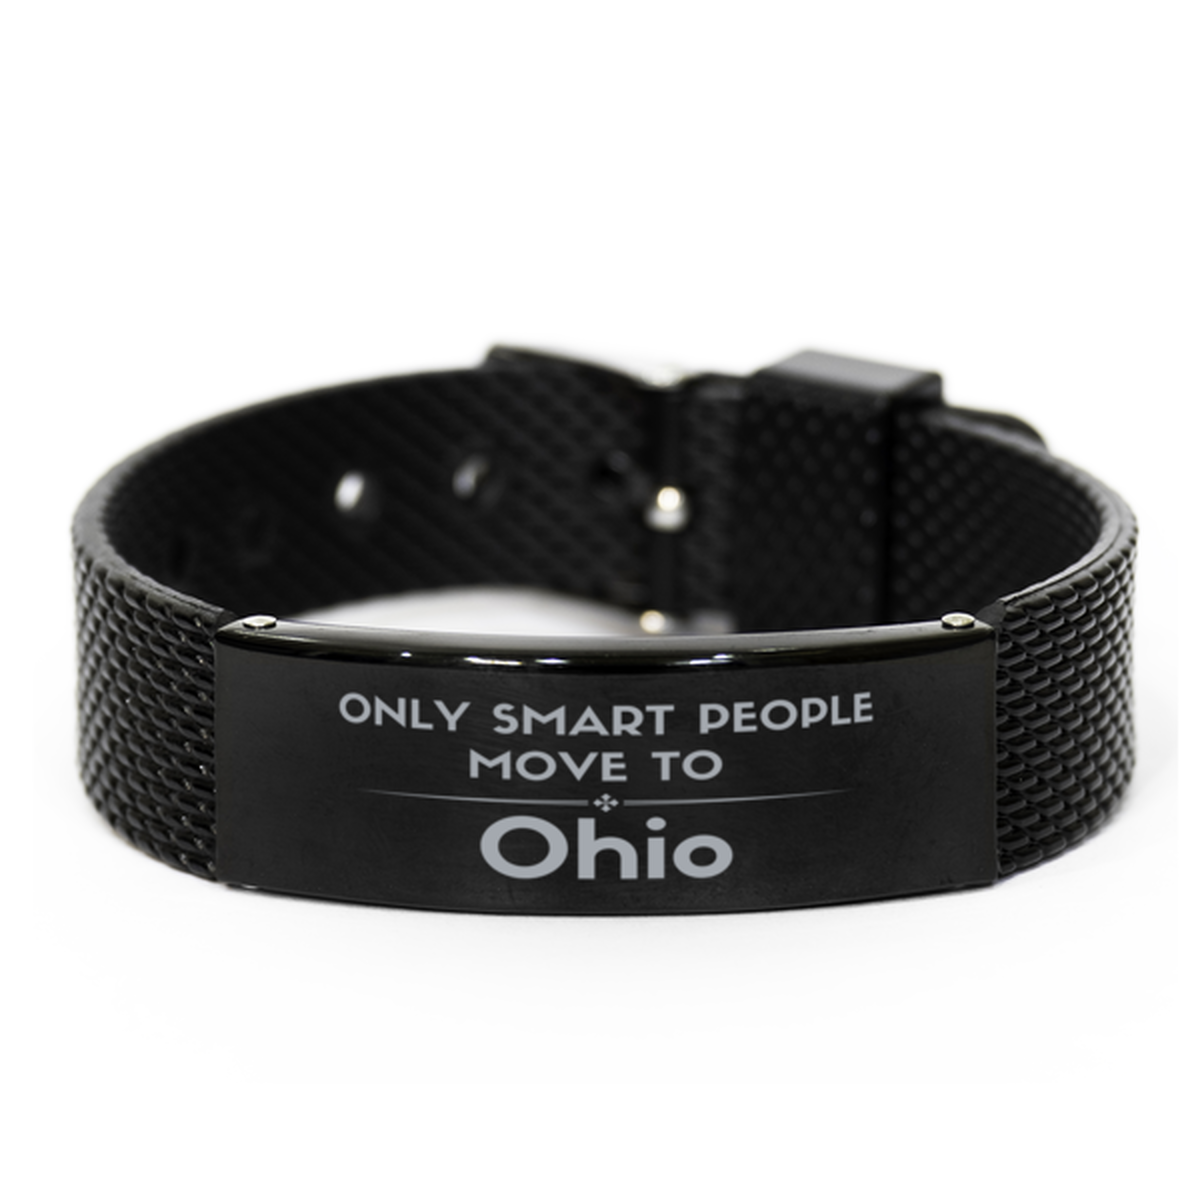 Only smart people move to Ohio Black Shark Mesh Bracelet, Gag Gifts For Ohio, Move to Ohio Gifts for Friends Coworker Funny Saying Quote